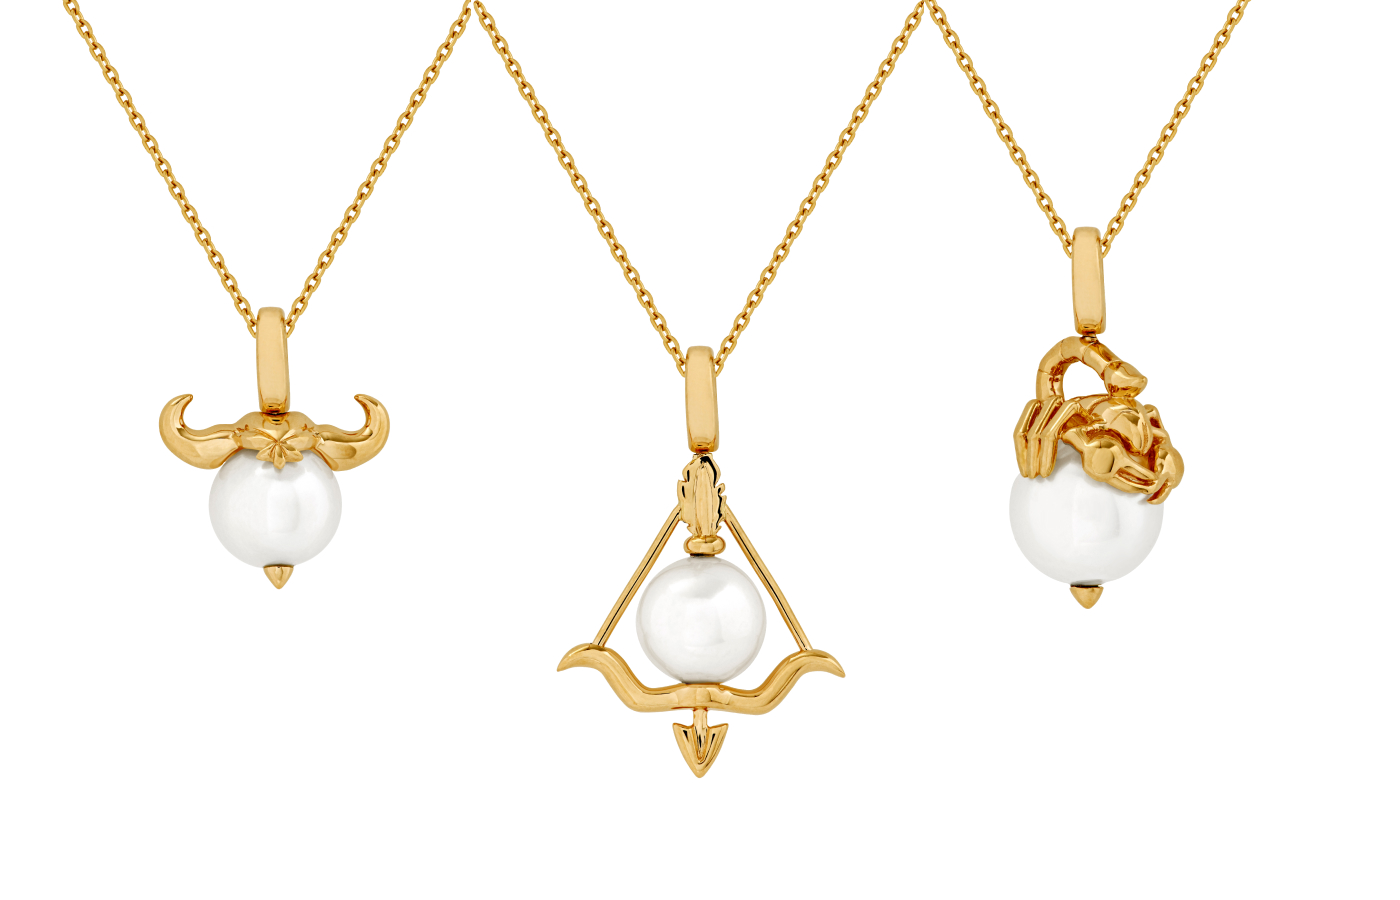 Stephen Webster Astro Ball necklaces in gold and pearl